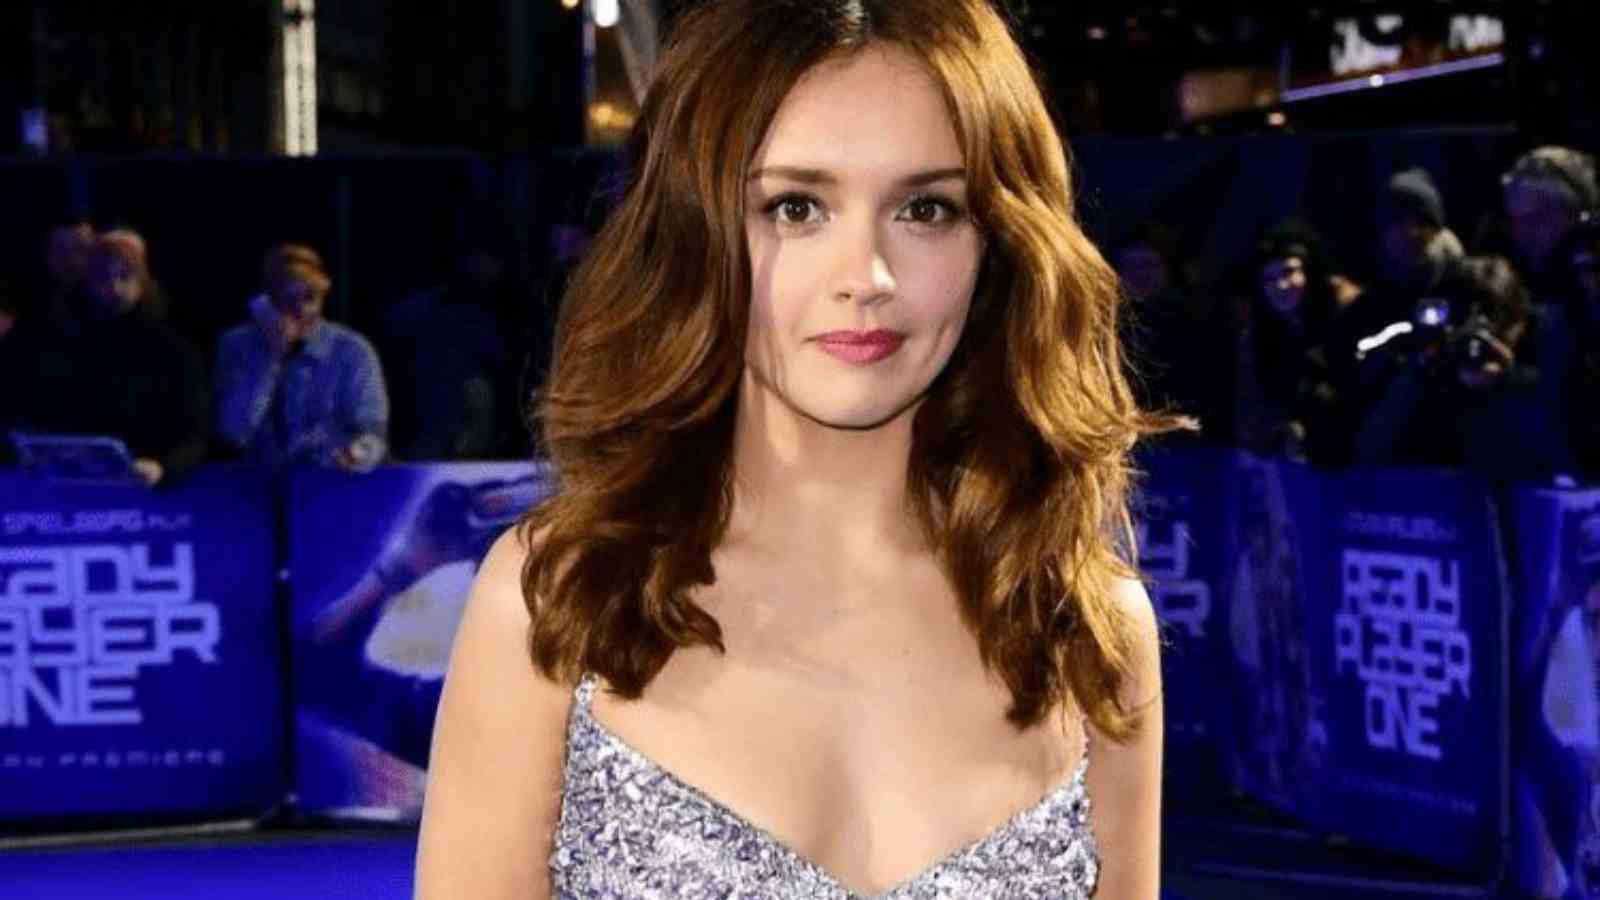 Who is Olivia Cooke dating?